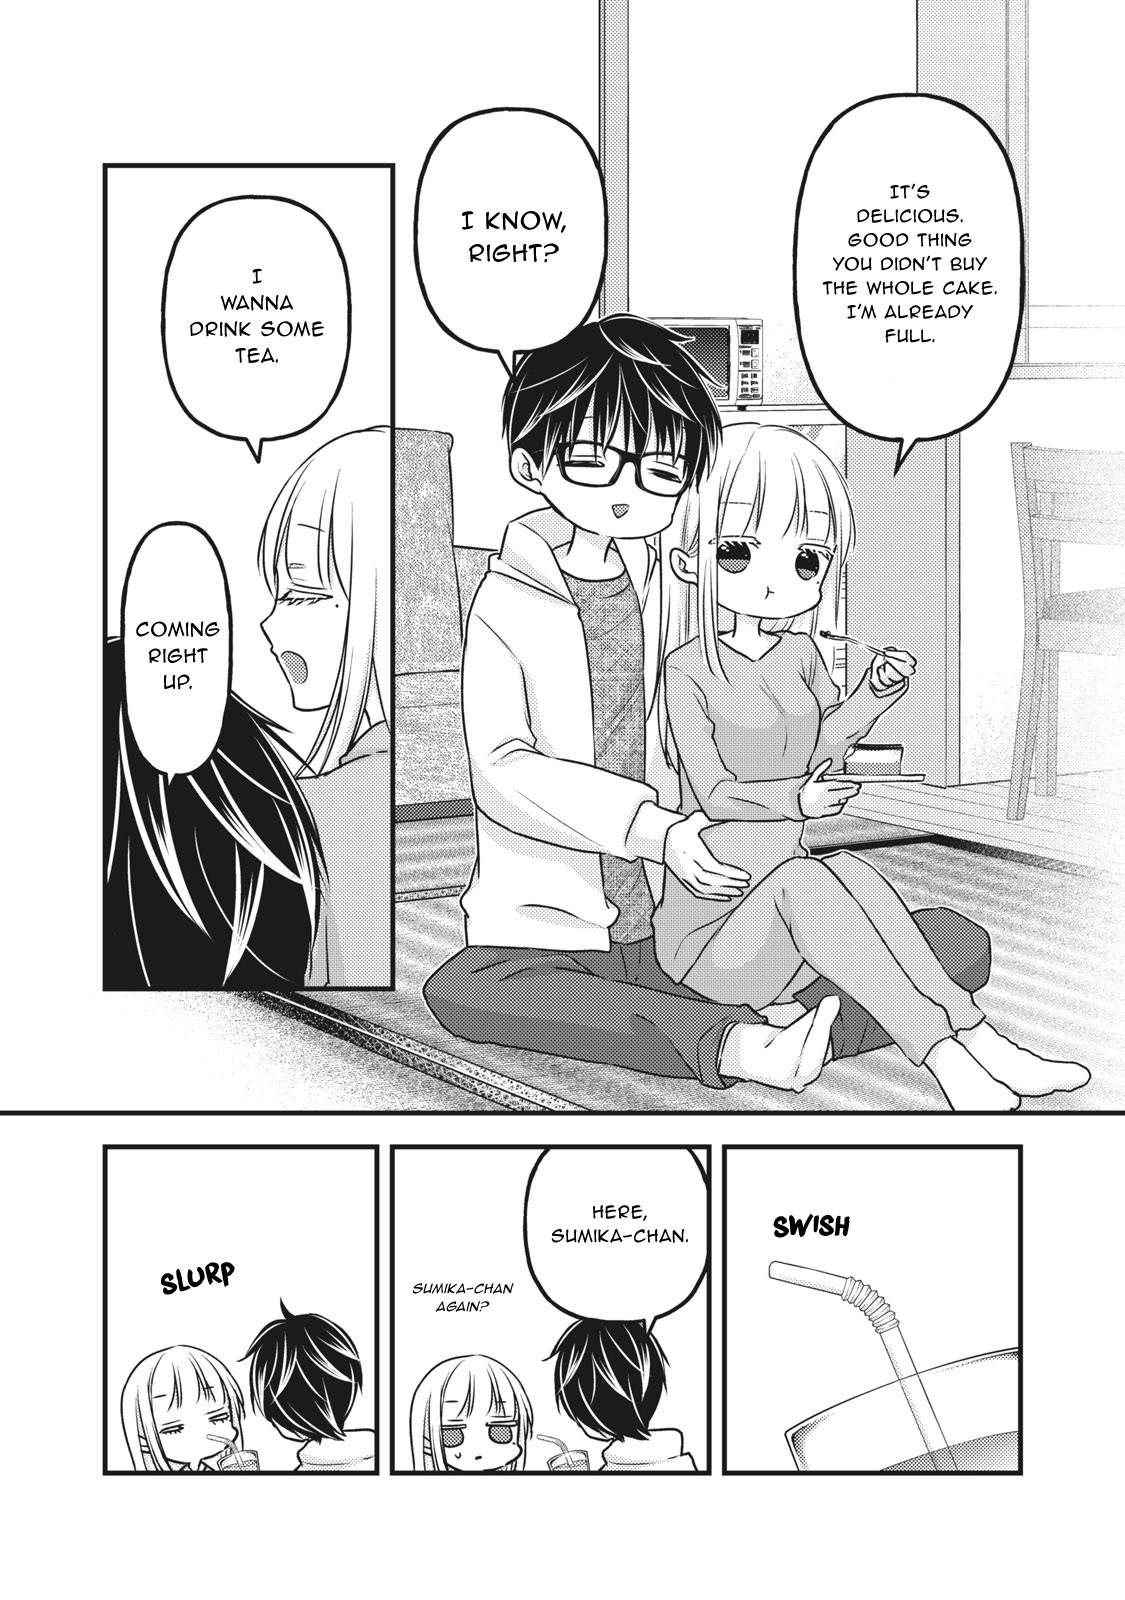 We May Be an Inexperienced Couple but... chapter 84 page 14